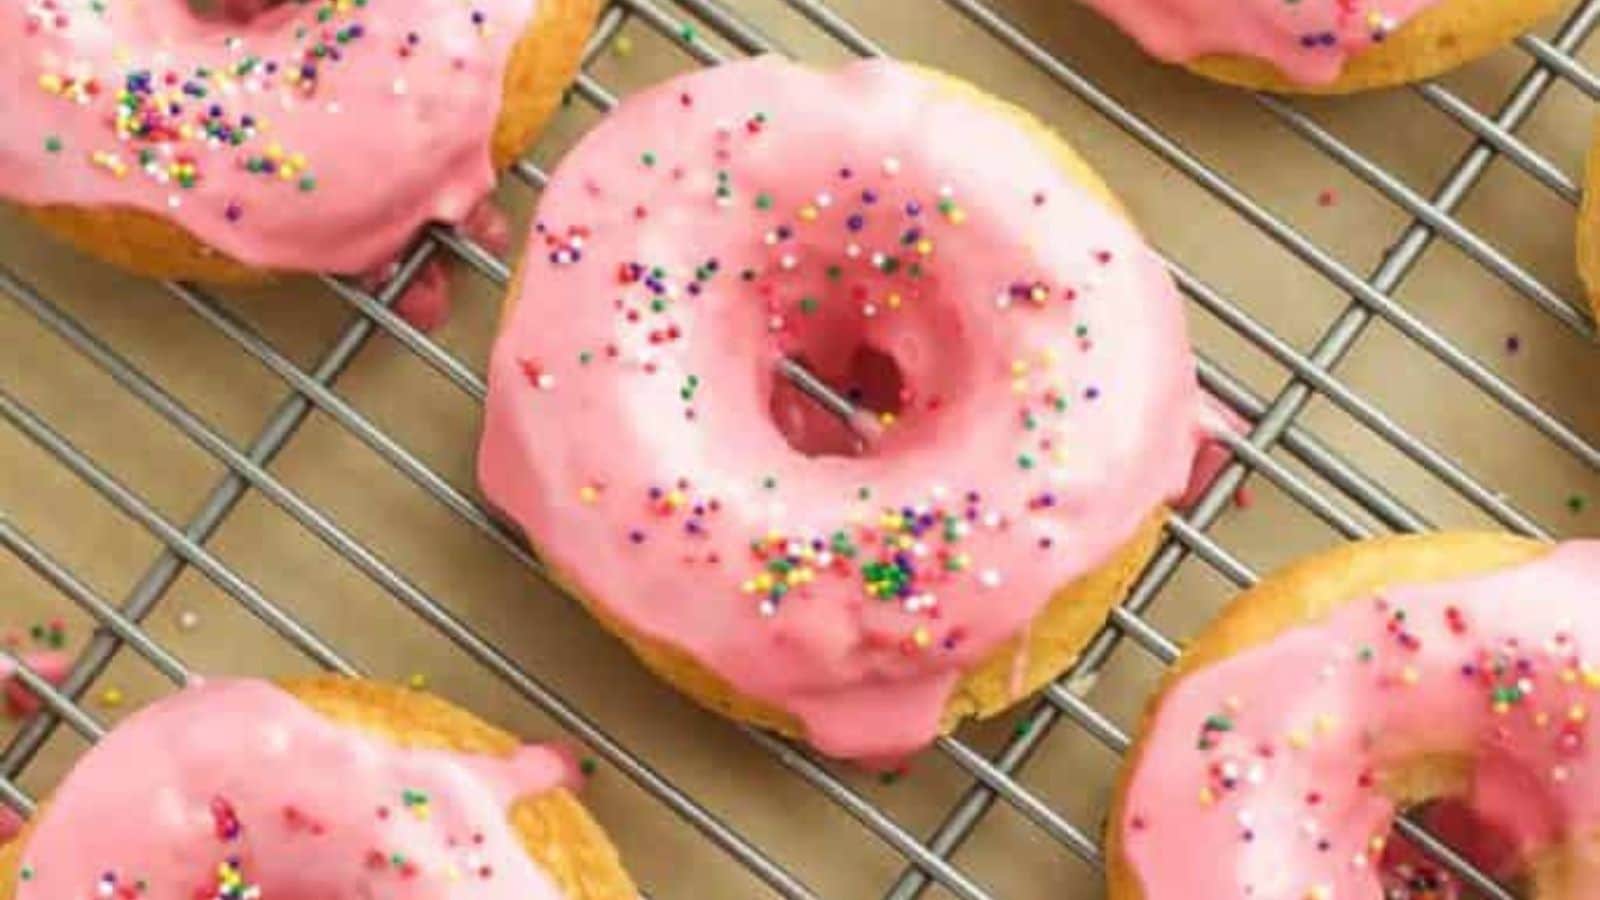 Pink glazed donuts on a cooling rack.